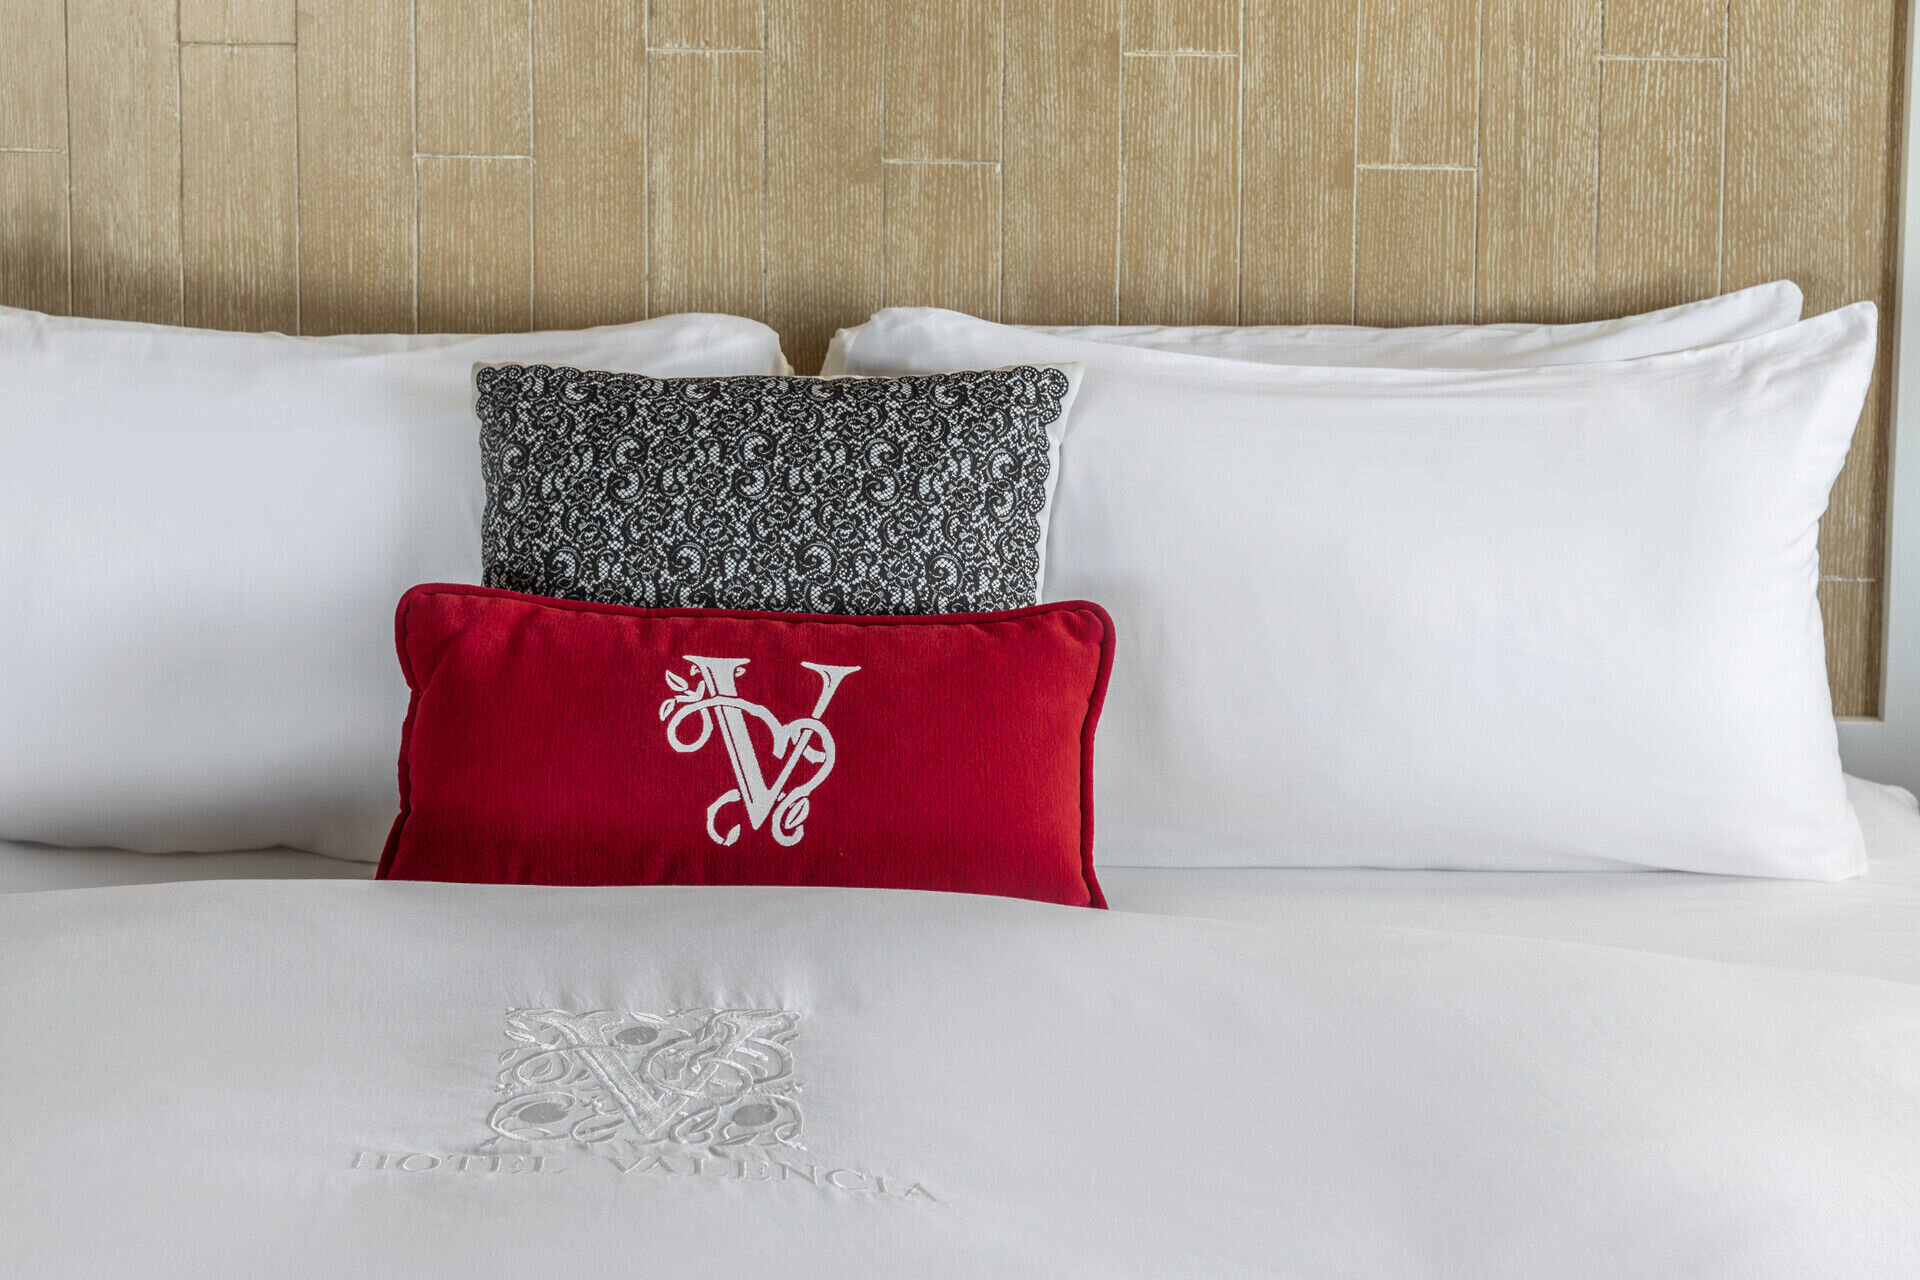 Bed with red pillow